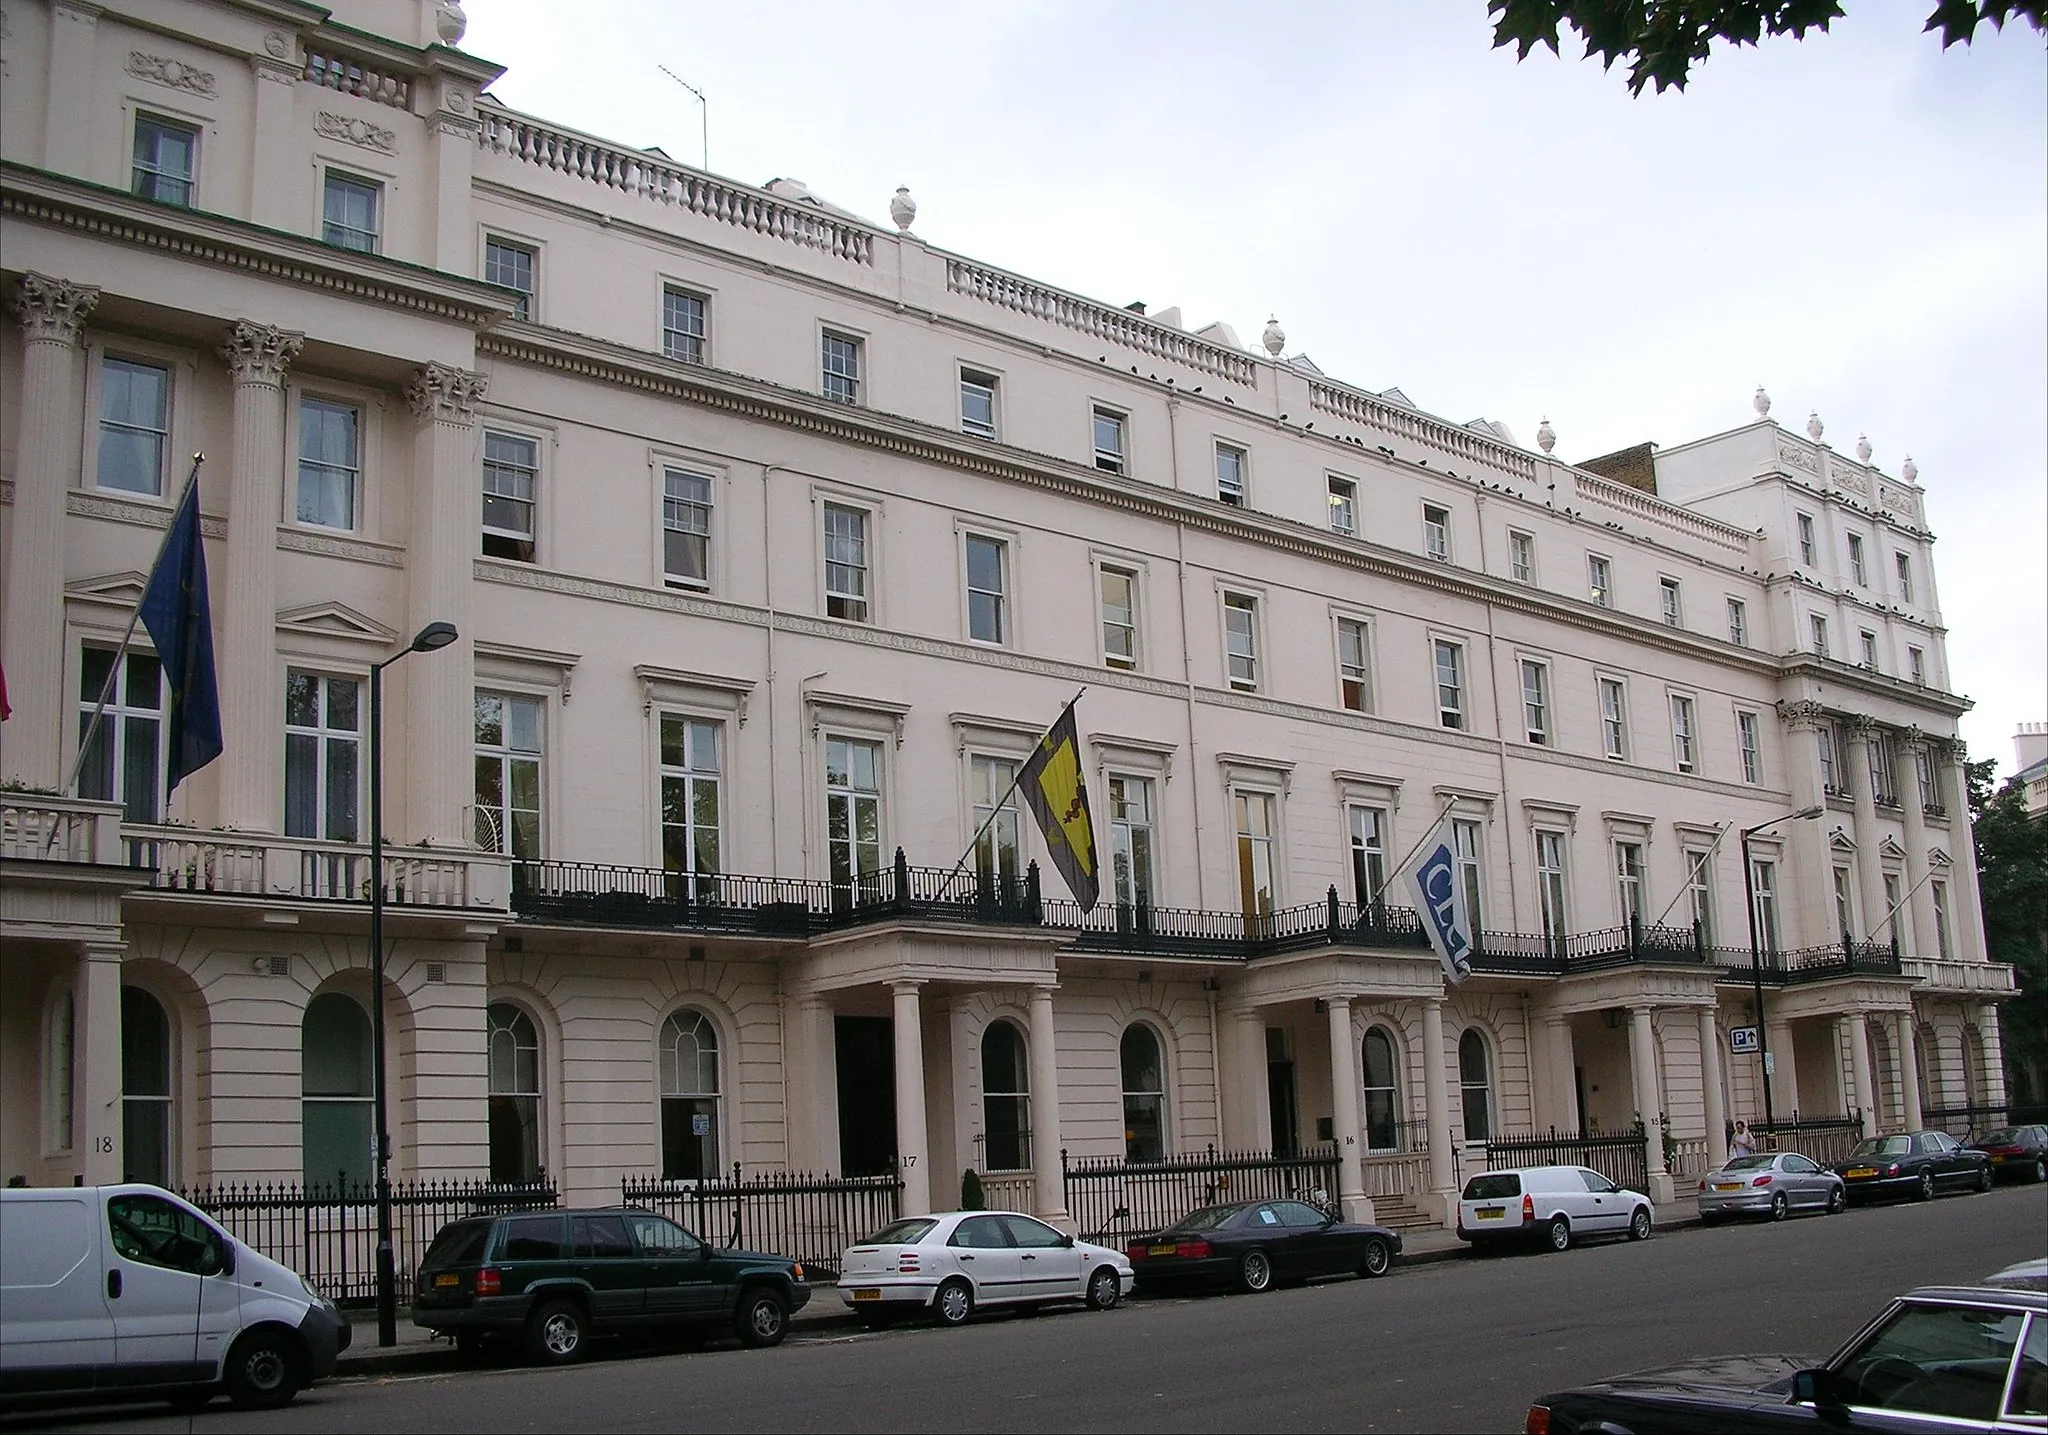 Photo showing: The Royal College of Psychiatrists, 17 Belgrave Square, London, England. (Building with yellow flag). Photographed by me 29 September 2006. Oosoom